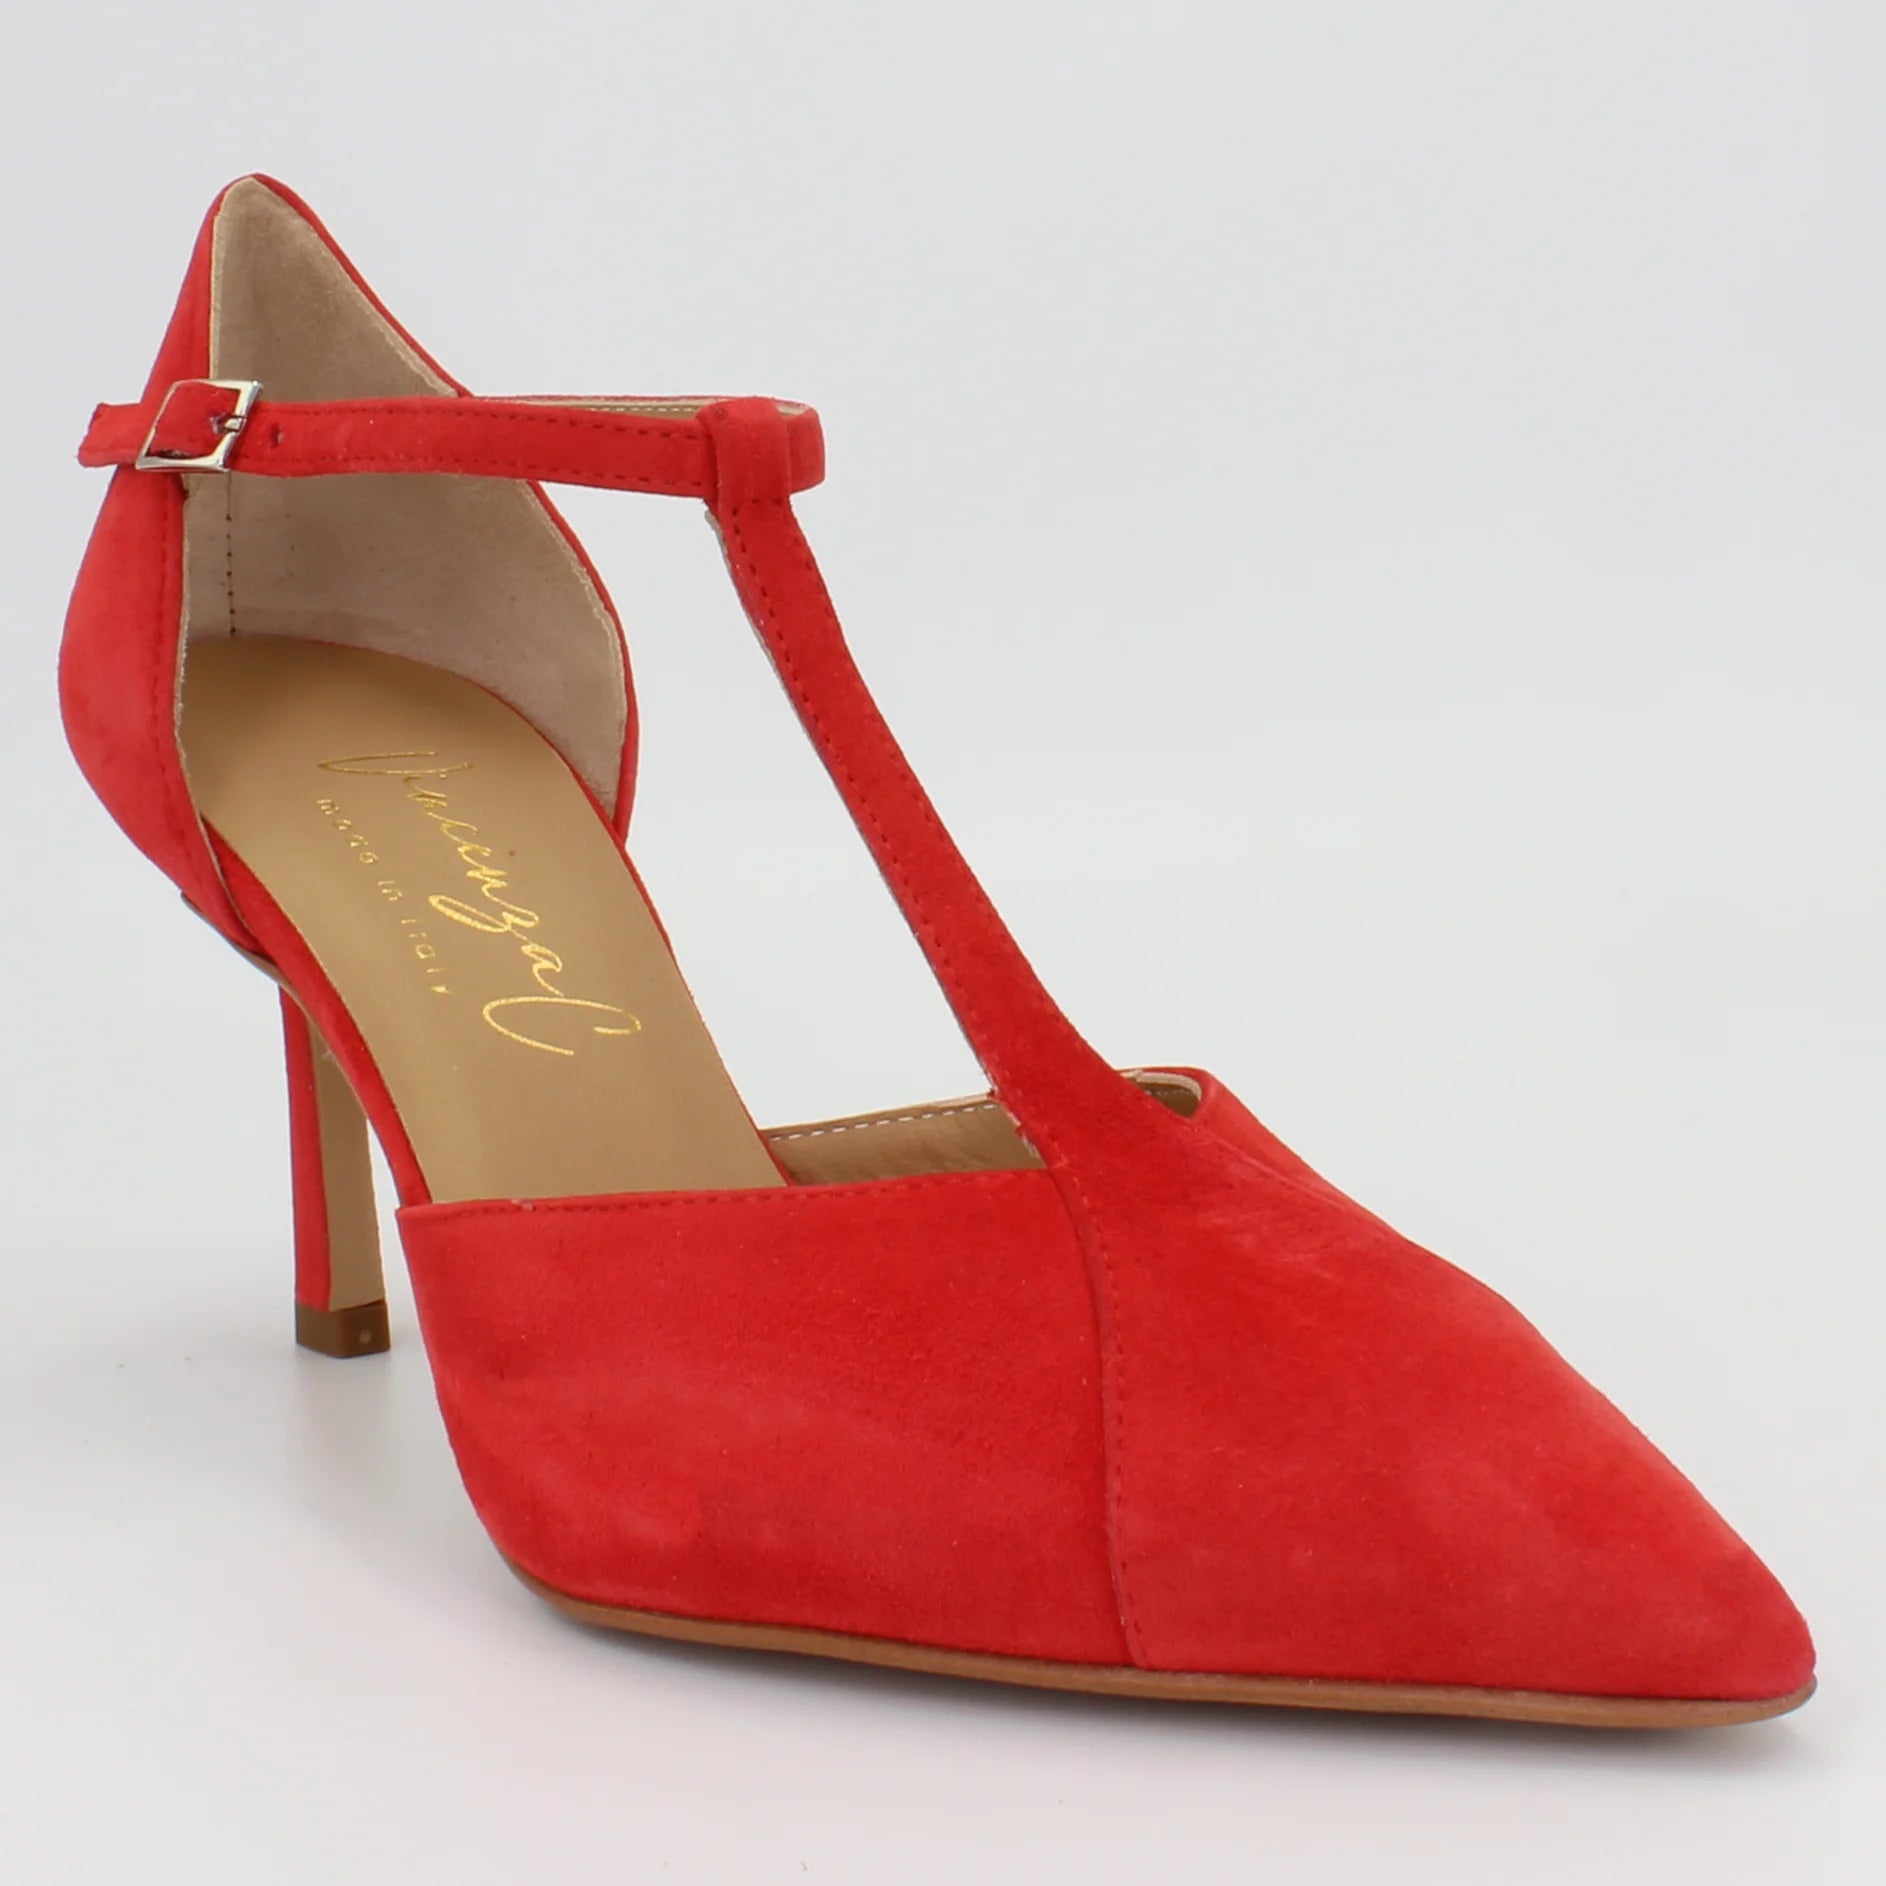 Shop Handmade Italian Leather Suede Mary Jane Rossetto (V17) or browse our range of hand-made Italian shoes for women in leather or suede in-store at Aliverti Cape Town, or shop online. We deliver in South Africa & offer multiple payment plans as well as accept multiple safe & secure payment methods.